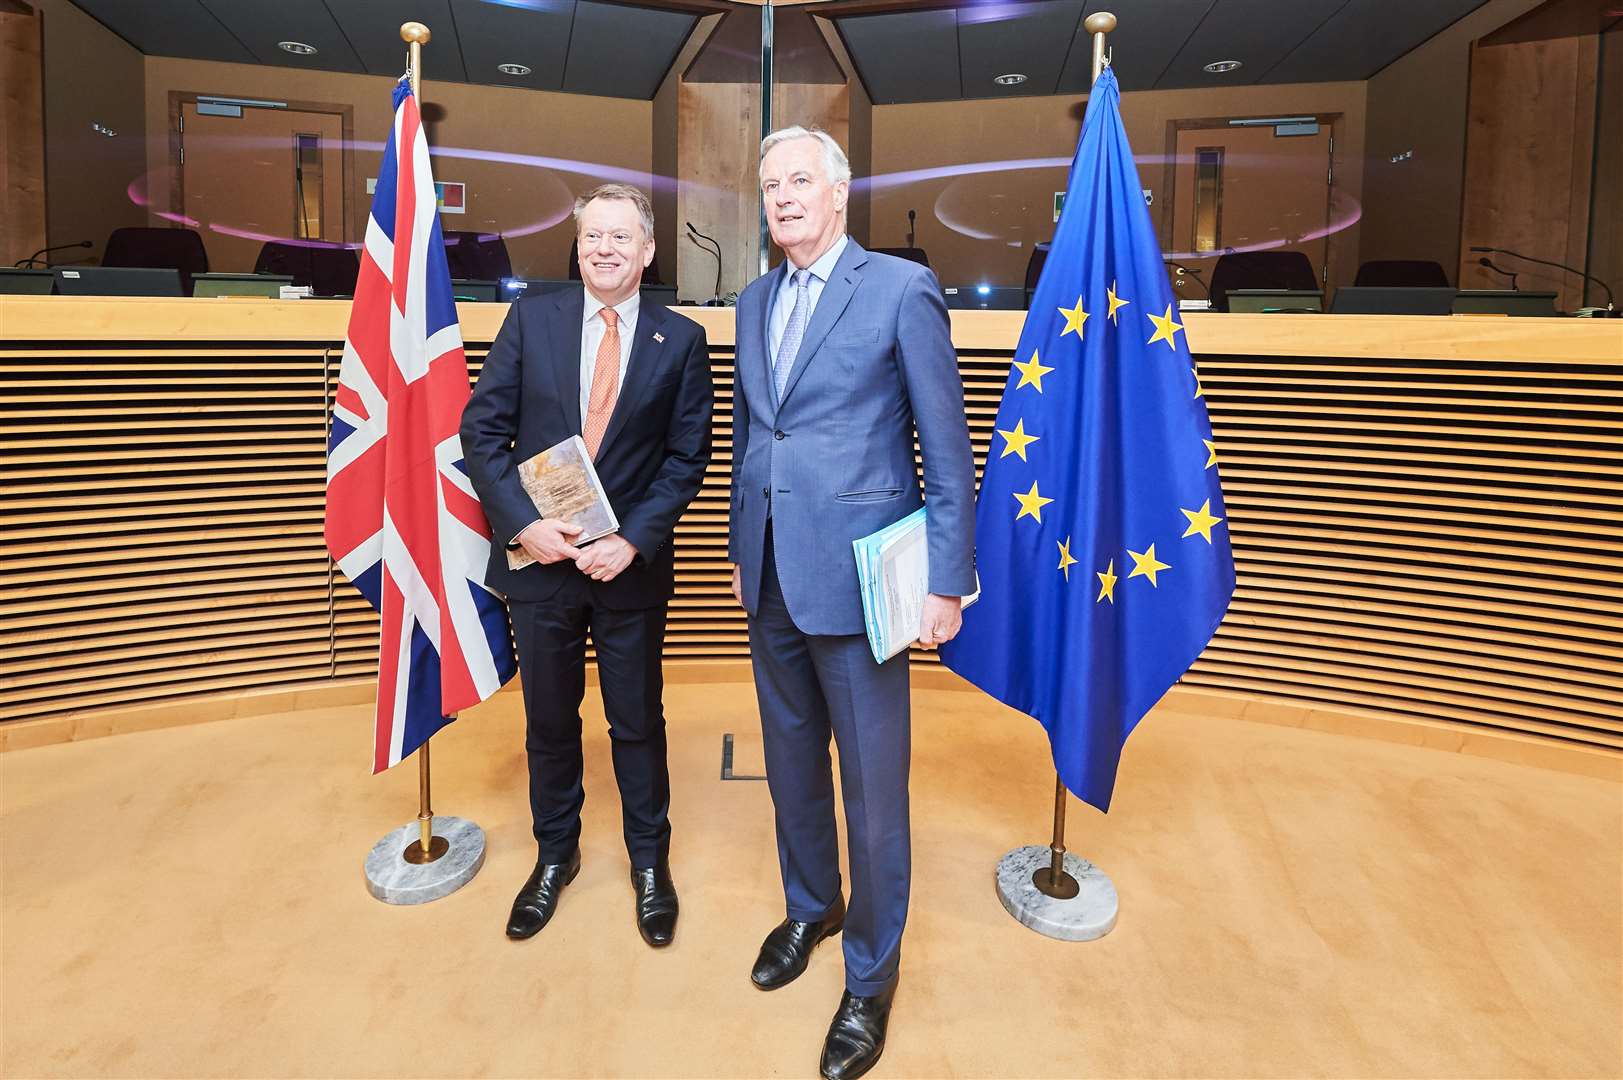 Both the UK and EU chief Brexit negotiators tested positive for Covid-19 but are determined to press ahead with post-Brexit talks